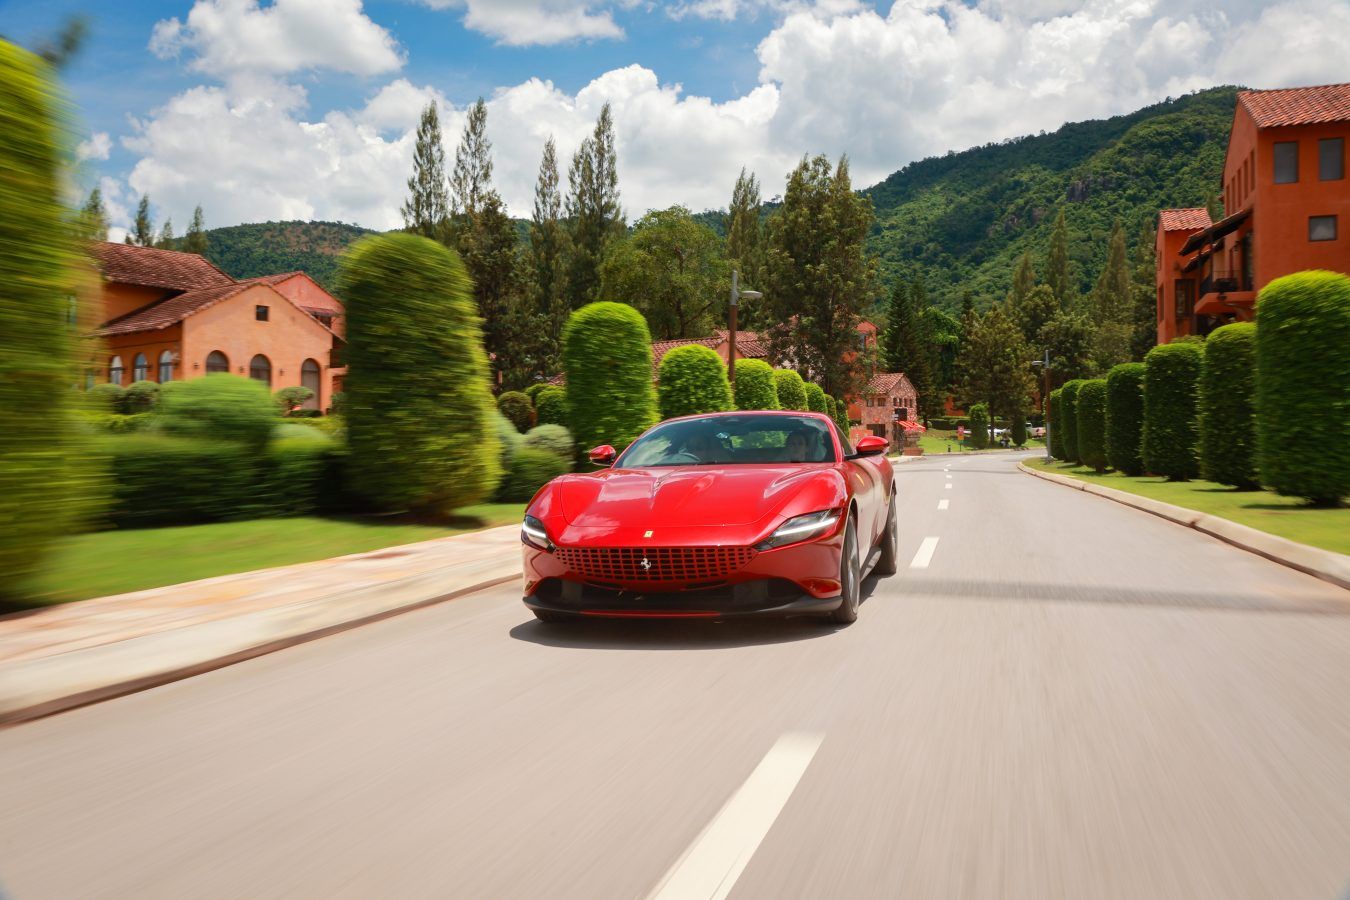 A 24h Journey to Get the Key to the La Nuova Dolce Vita with Ferrari Roma